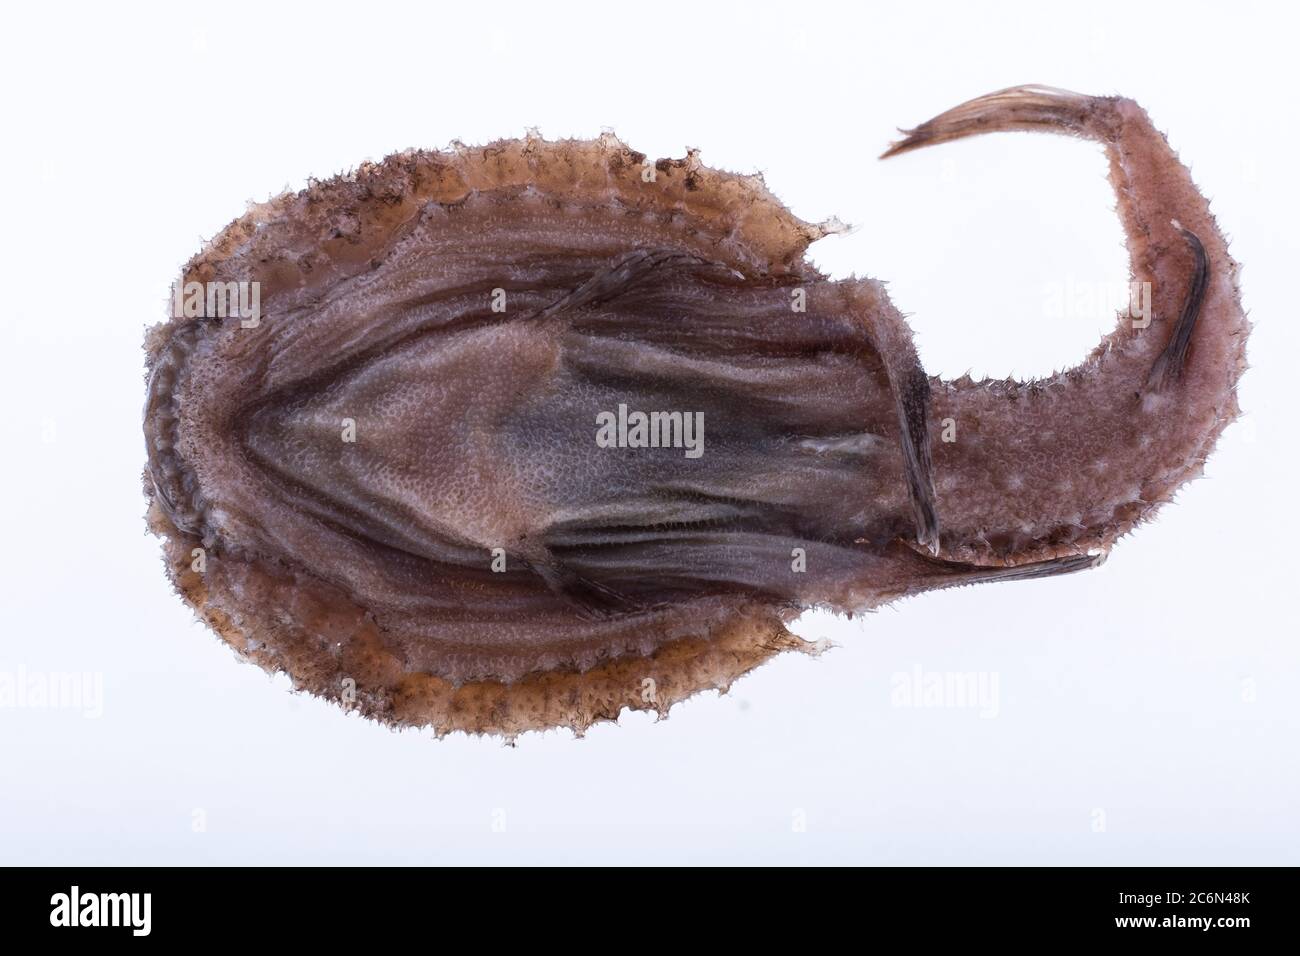 Dibranchus atlanticus fished in Mauritania (East Atlantic Ocean) from the collection of the Spanish Institute of Oceanography of Malaga, Spain. Stock Photo